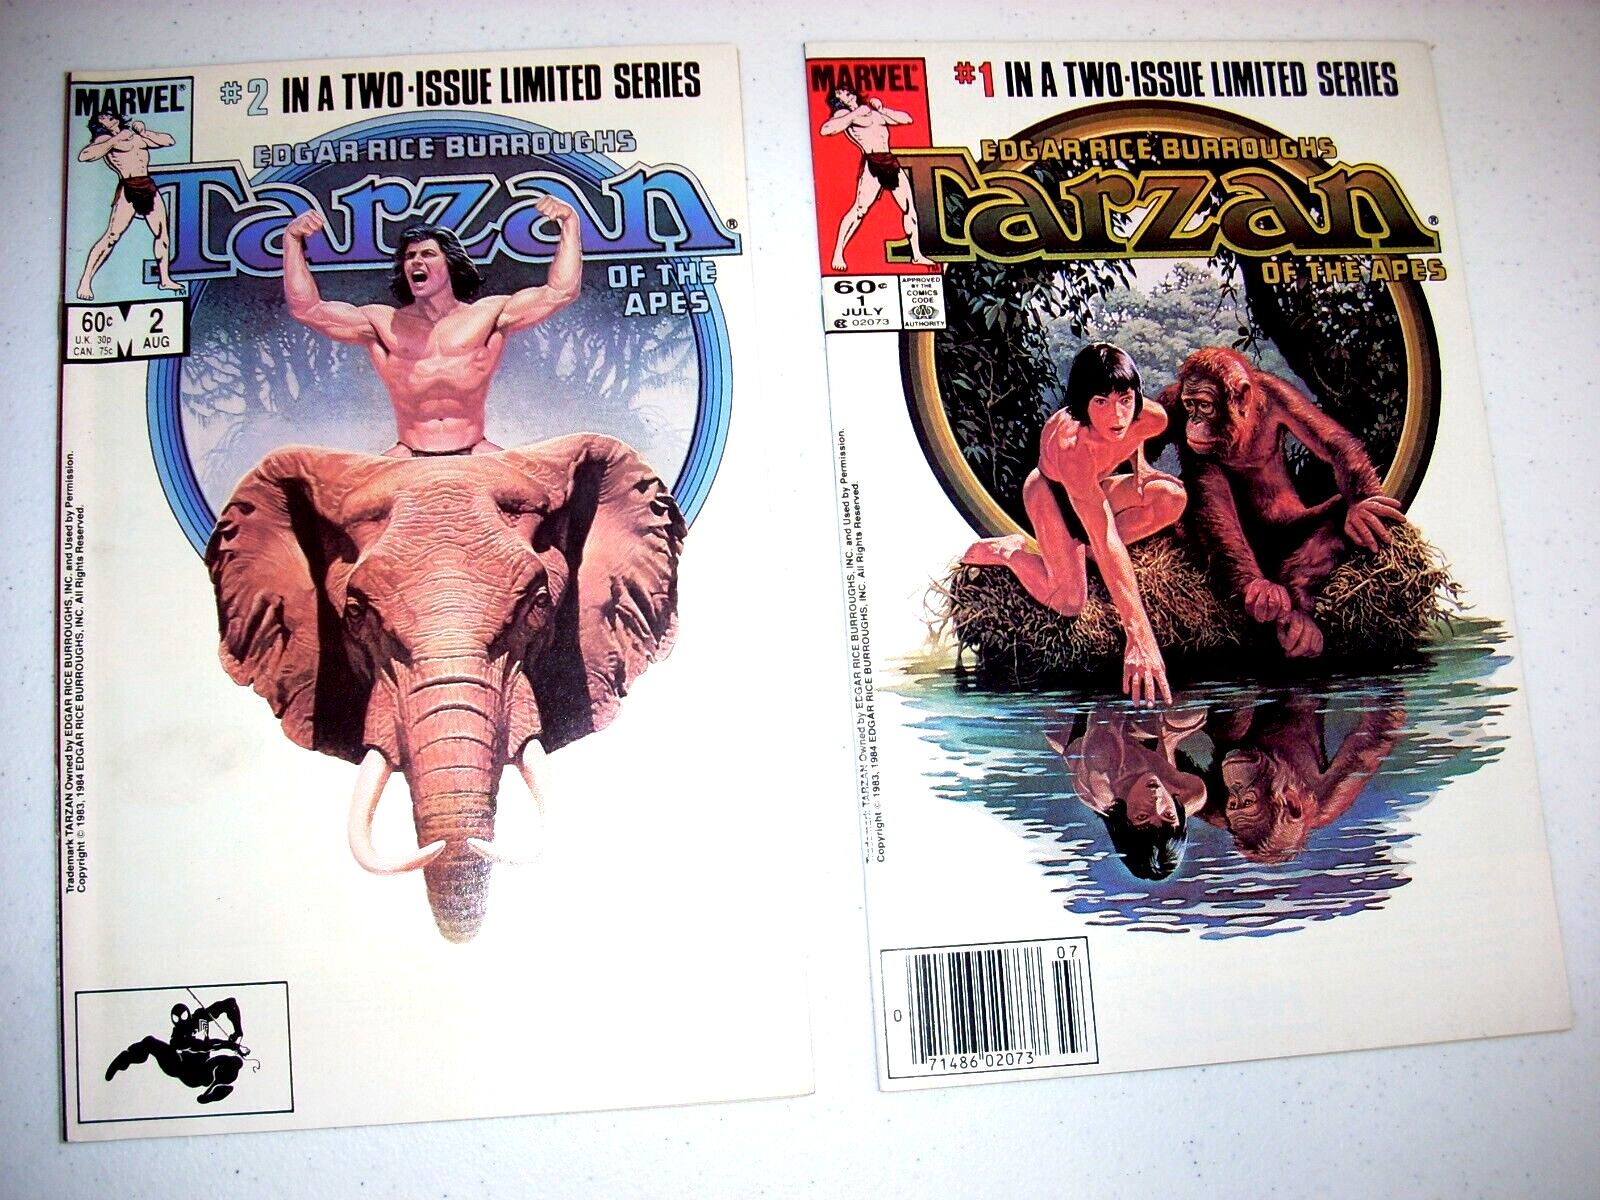 TARZAN #1 and #2 LIMITED SERIES (#1 is a NEWSSTAND VERSION) Marvel Comics 1984